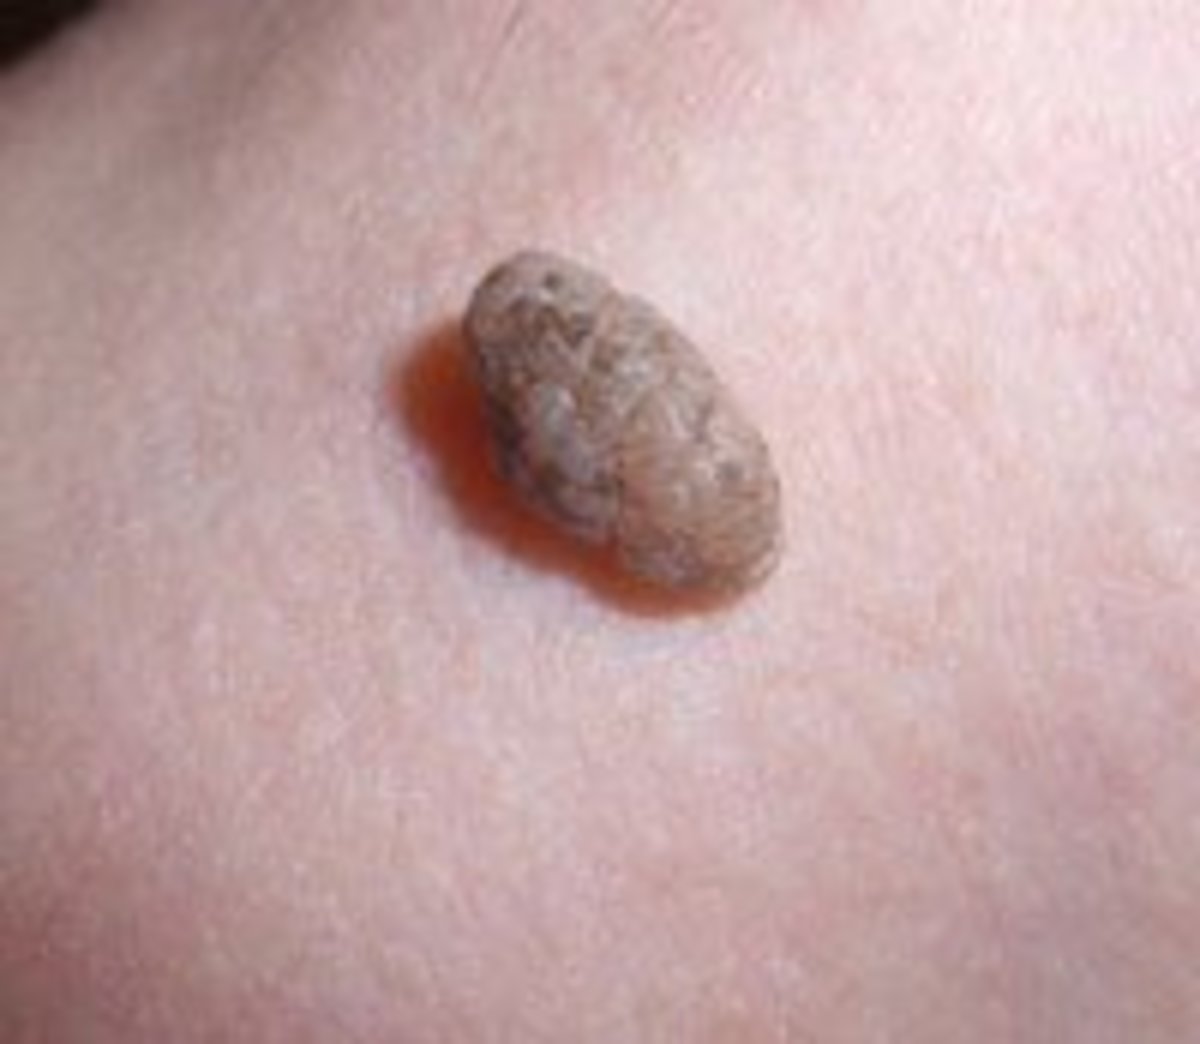 Skin tags, as the one pictured here, can be found on areas of the body where there are folds or creases. The neck, groin, armpits, and beneath the arms are a few of these more common areas